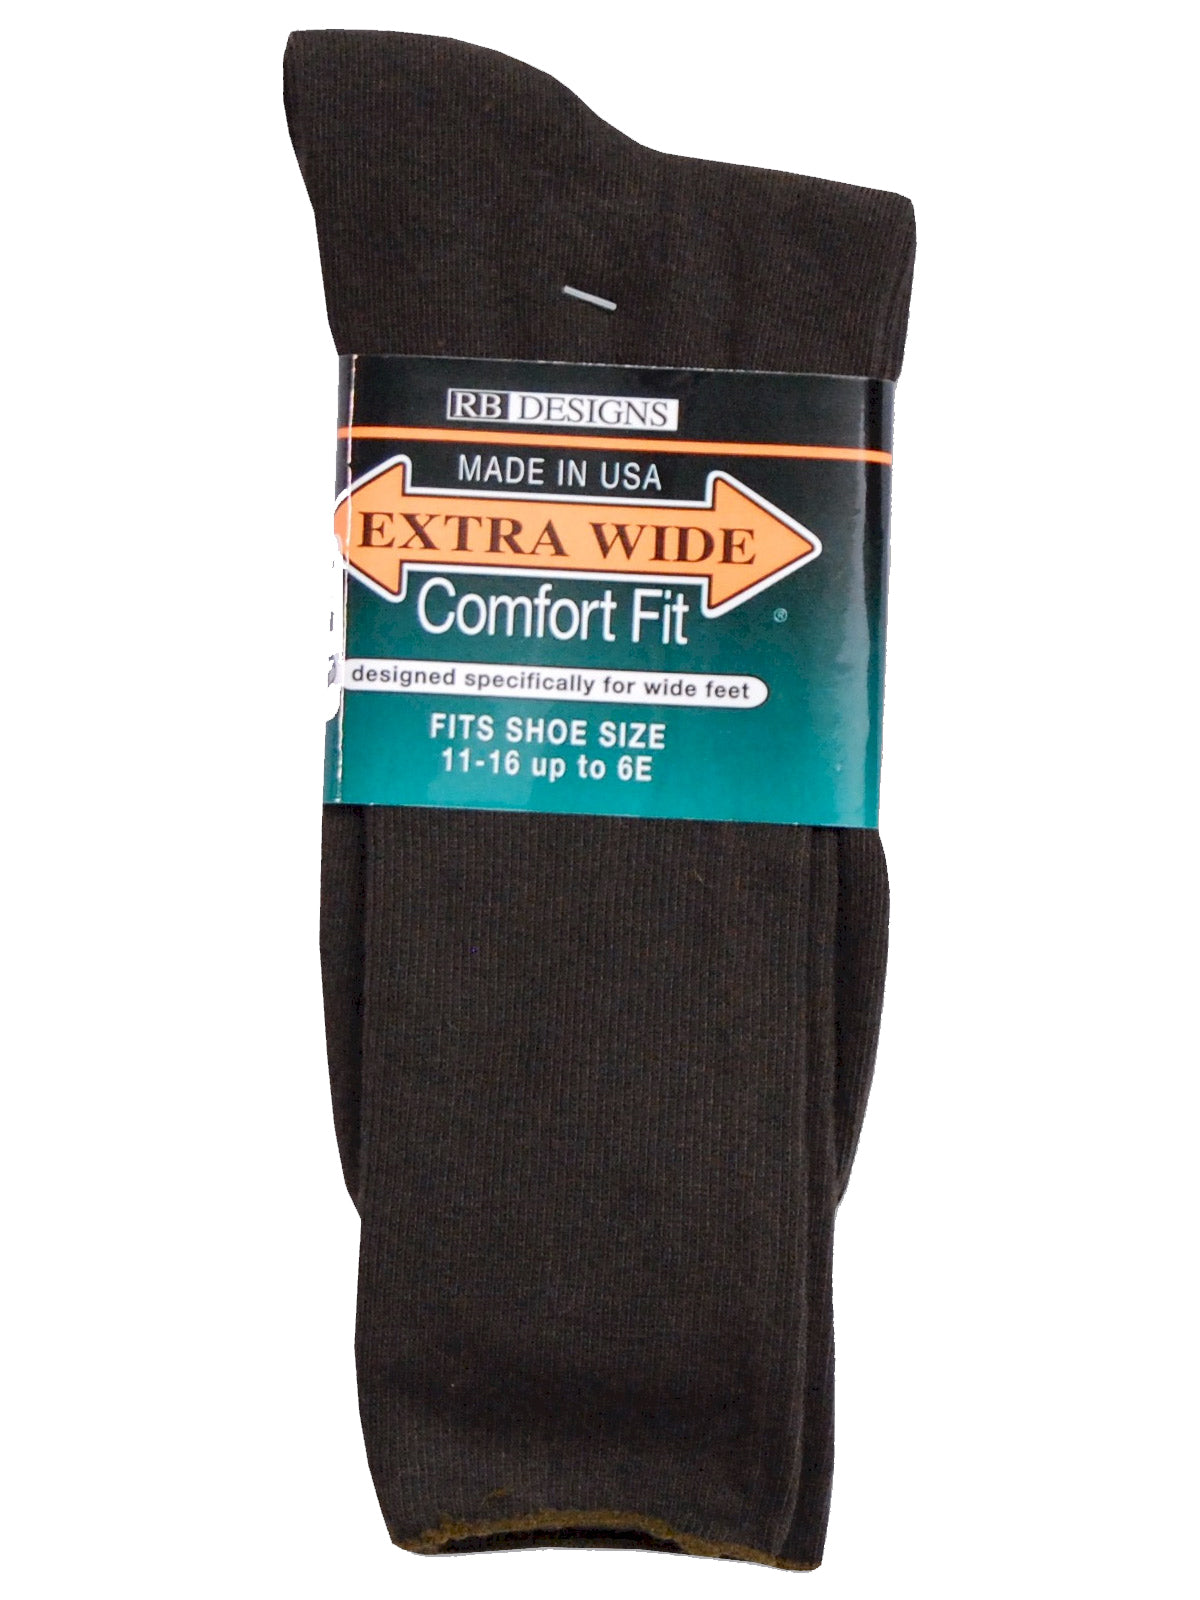 Extra Wide Comfort Fit Athletic Crew (Mid-Calf) Socks for Men and